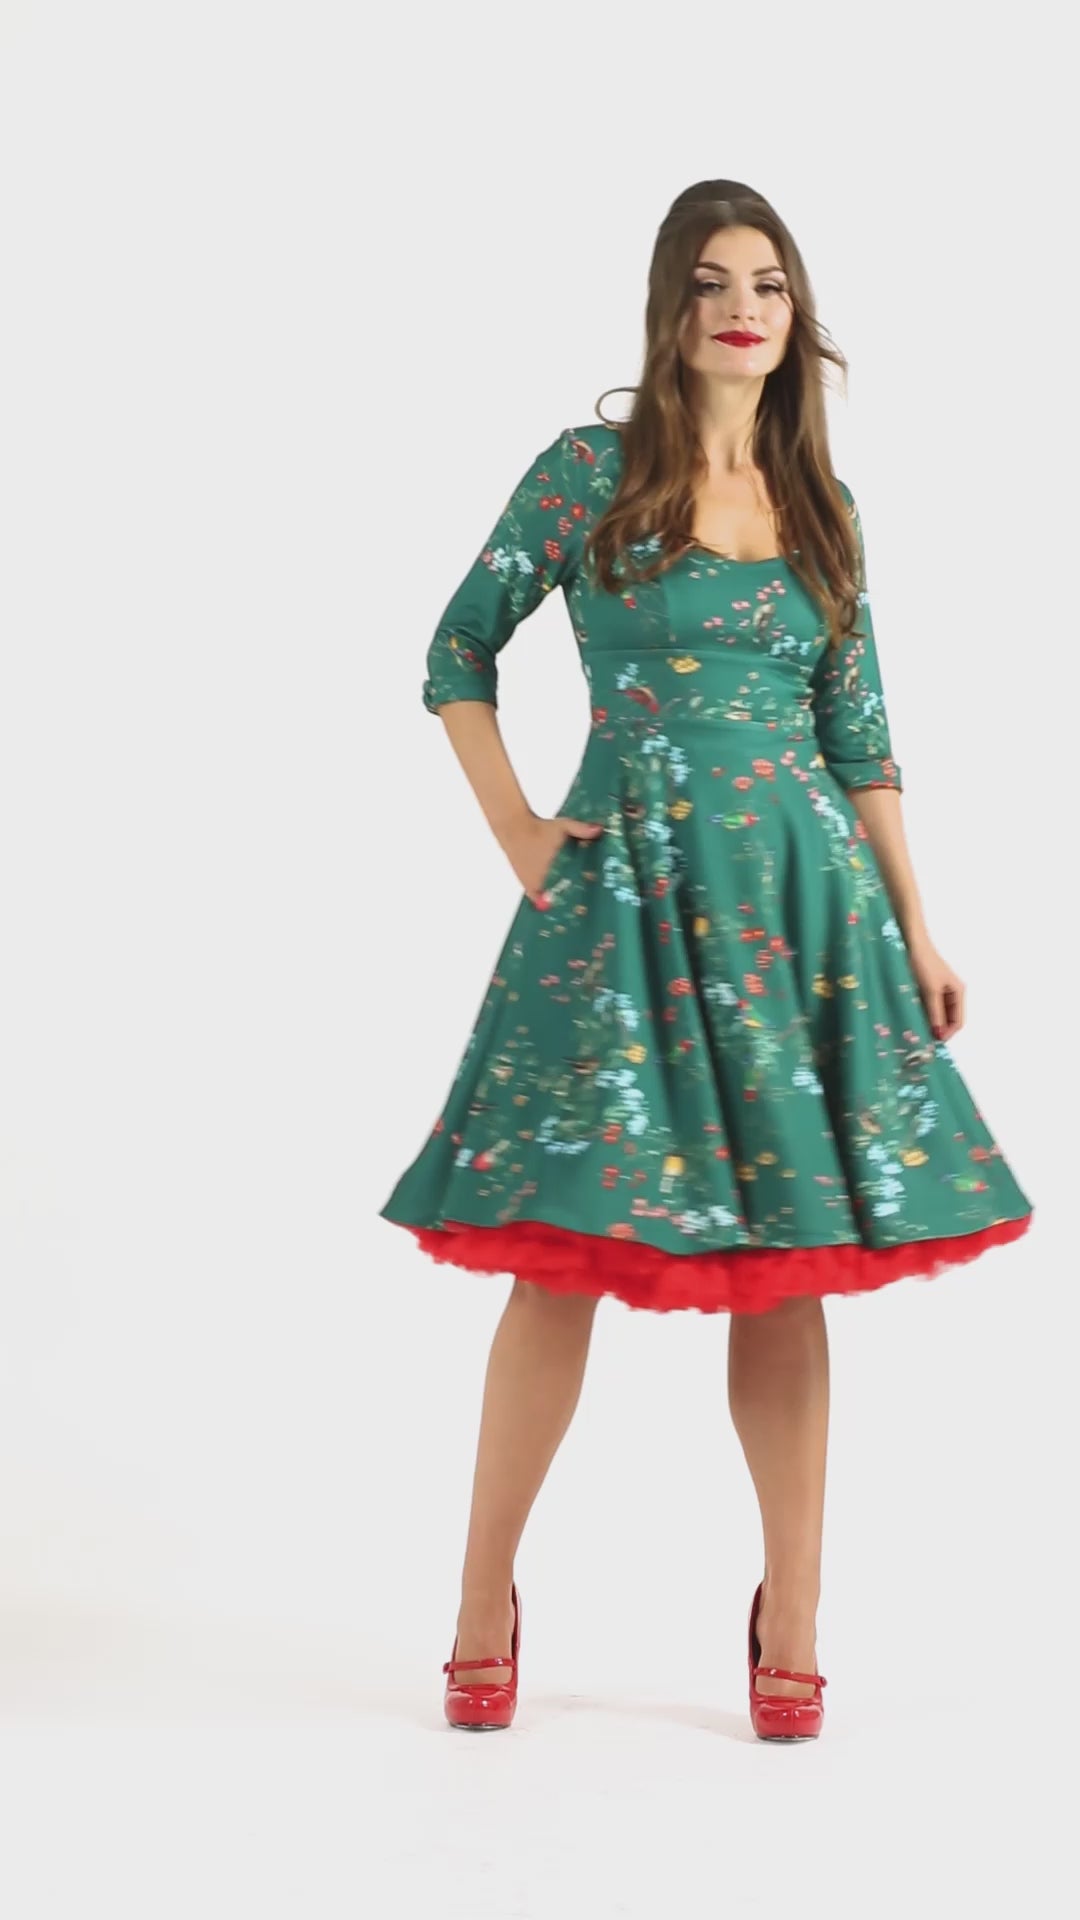 Video of a model wearing a 50s-Style Green Long-Sleeved dress with Bird Print.